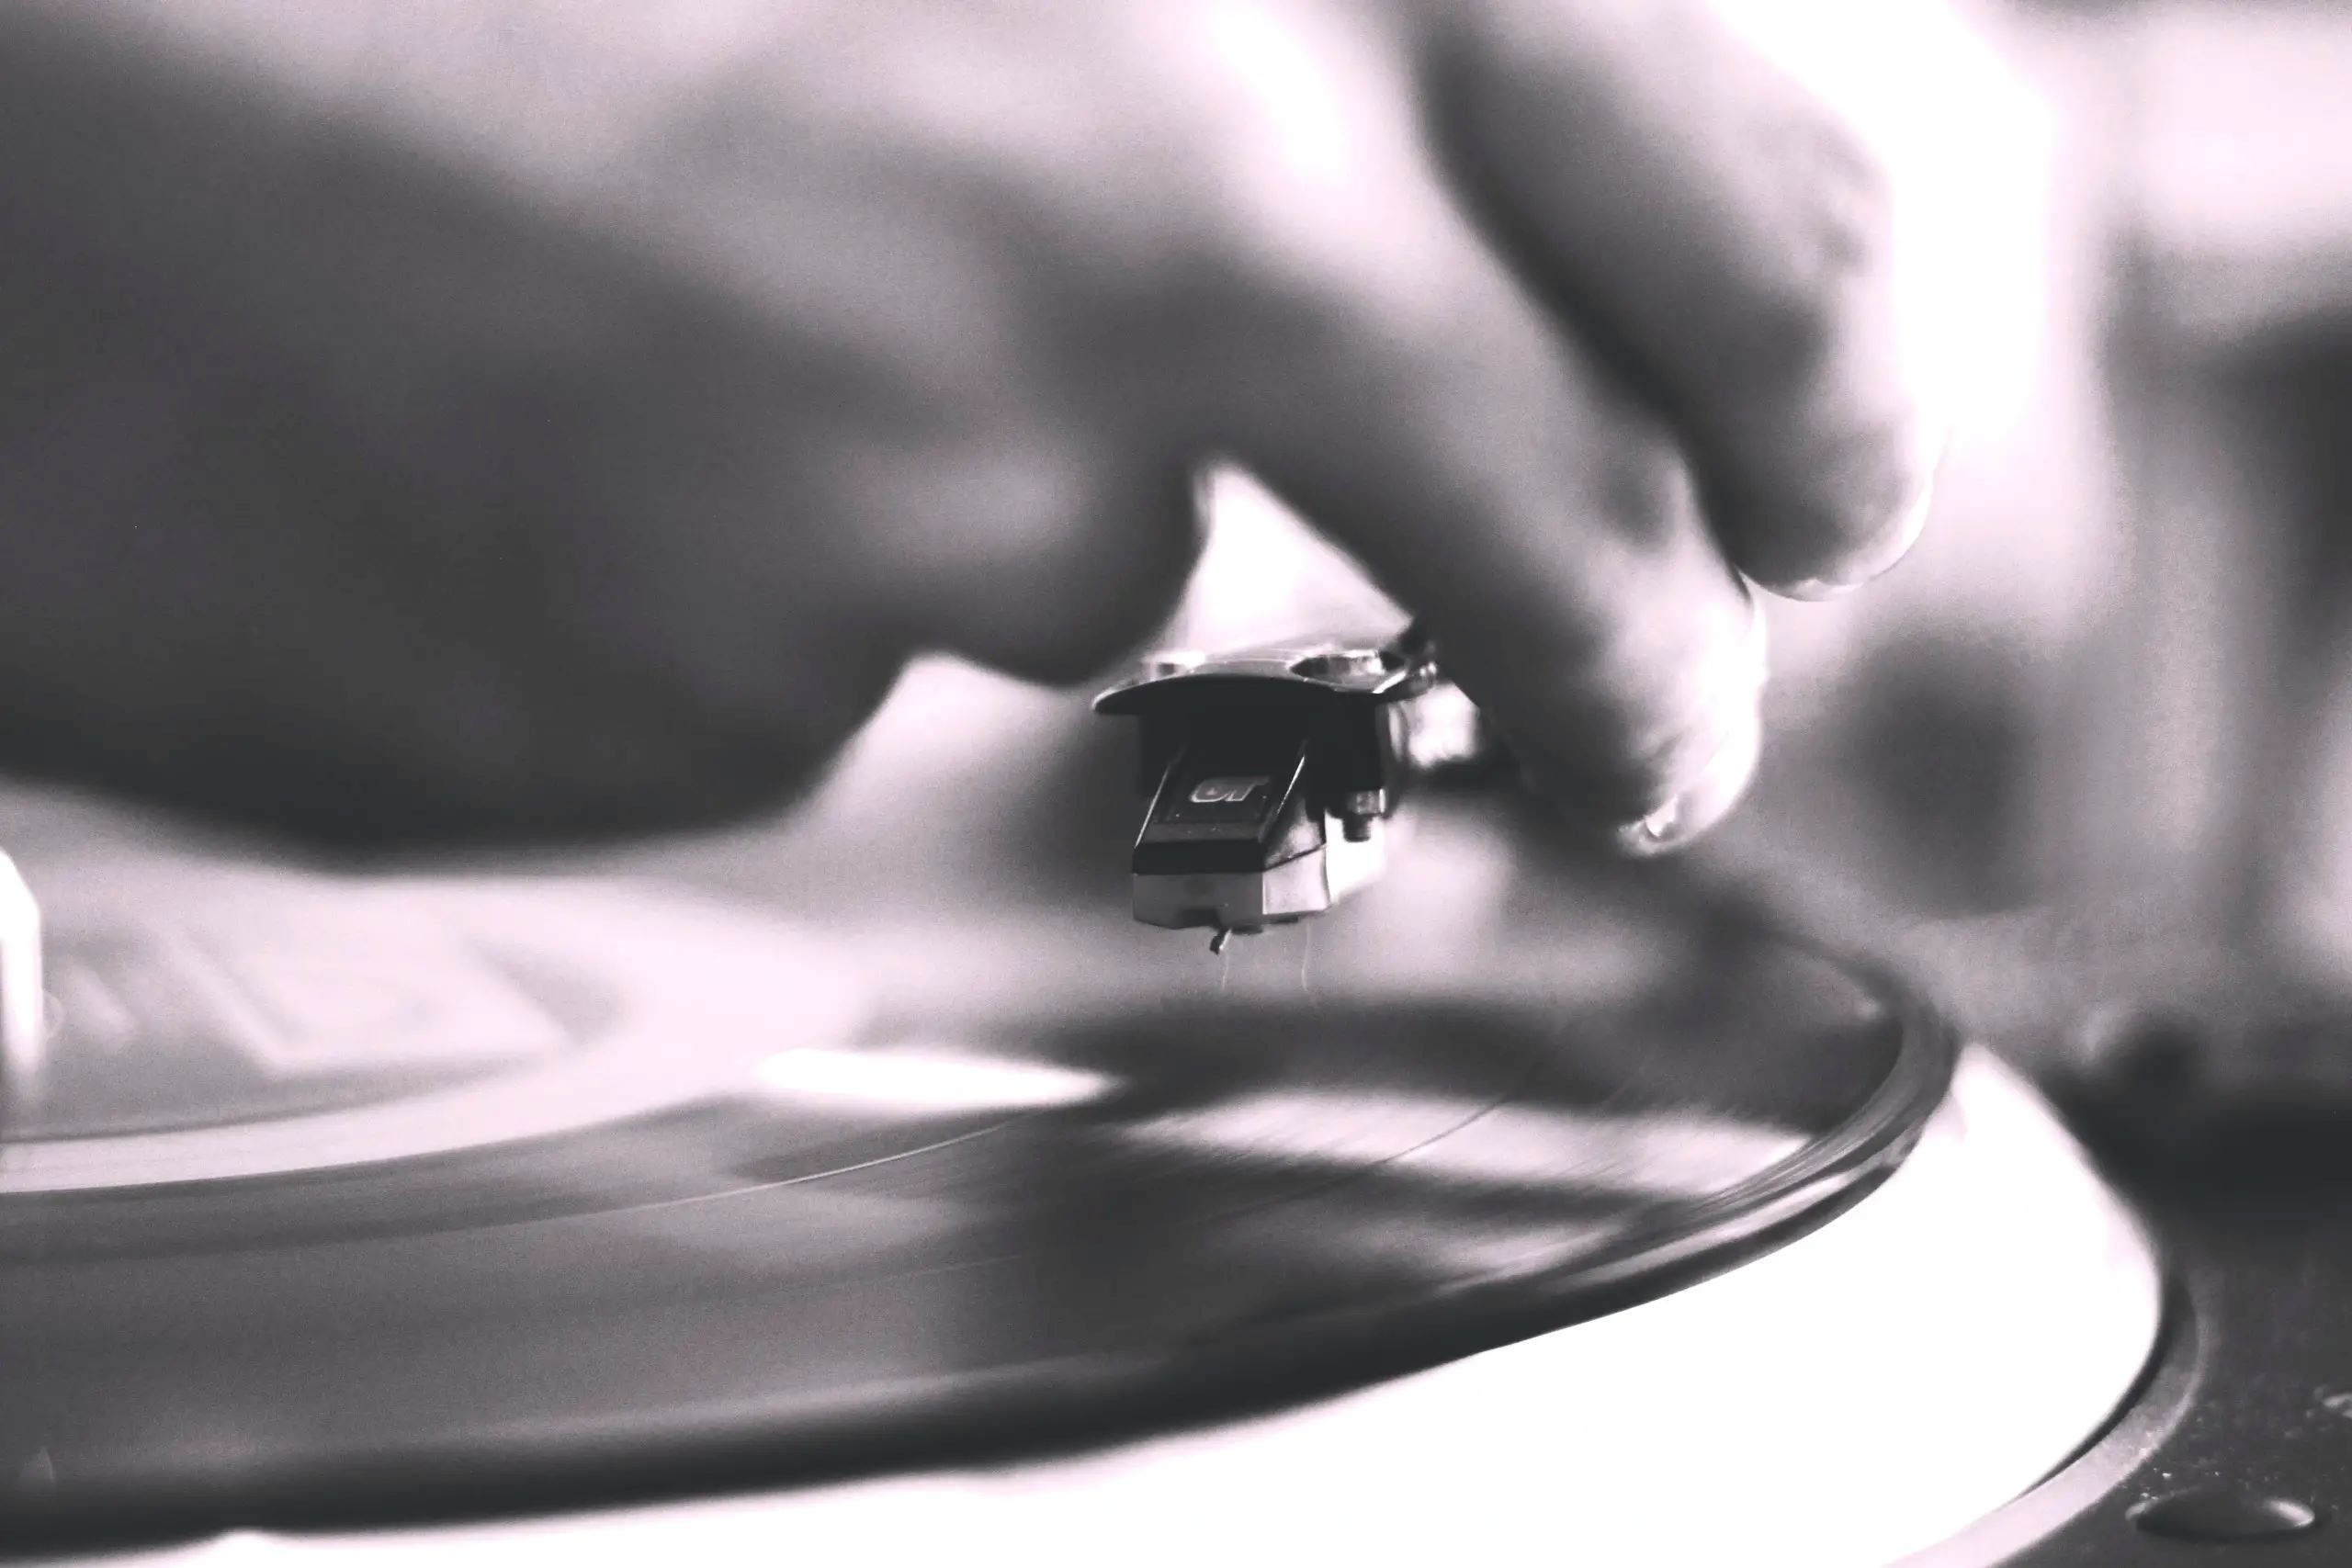 The Ultimate Hack To Clean Your Record Player's Needle!